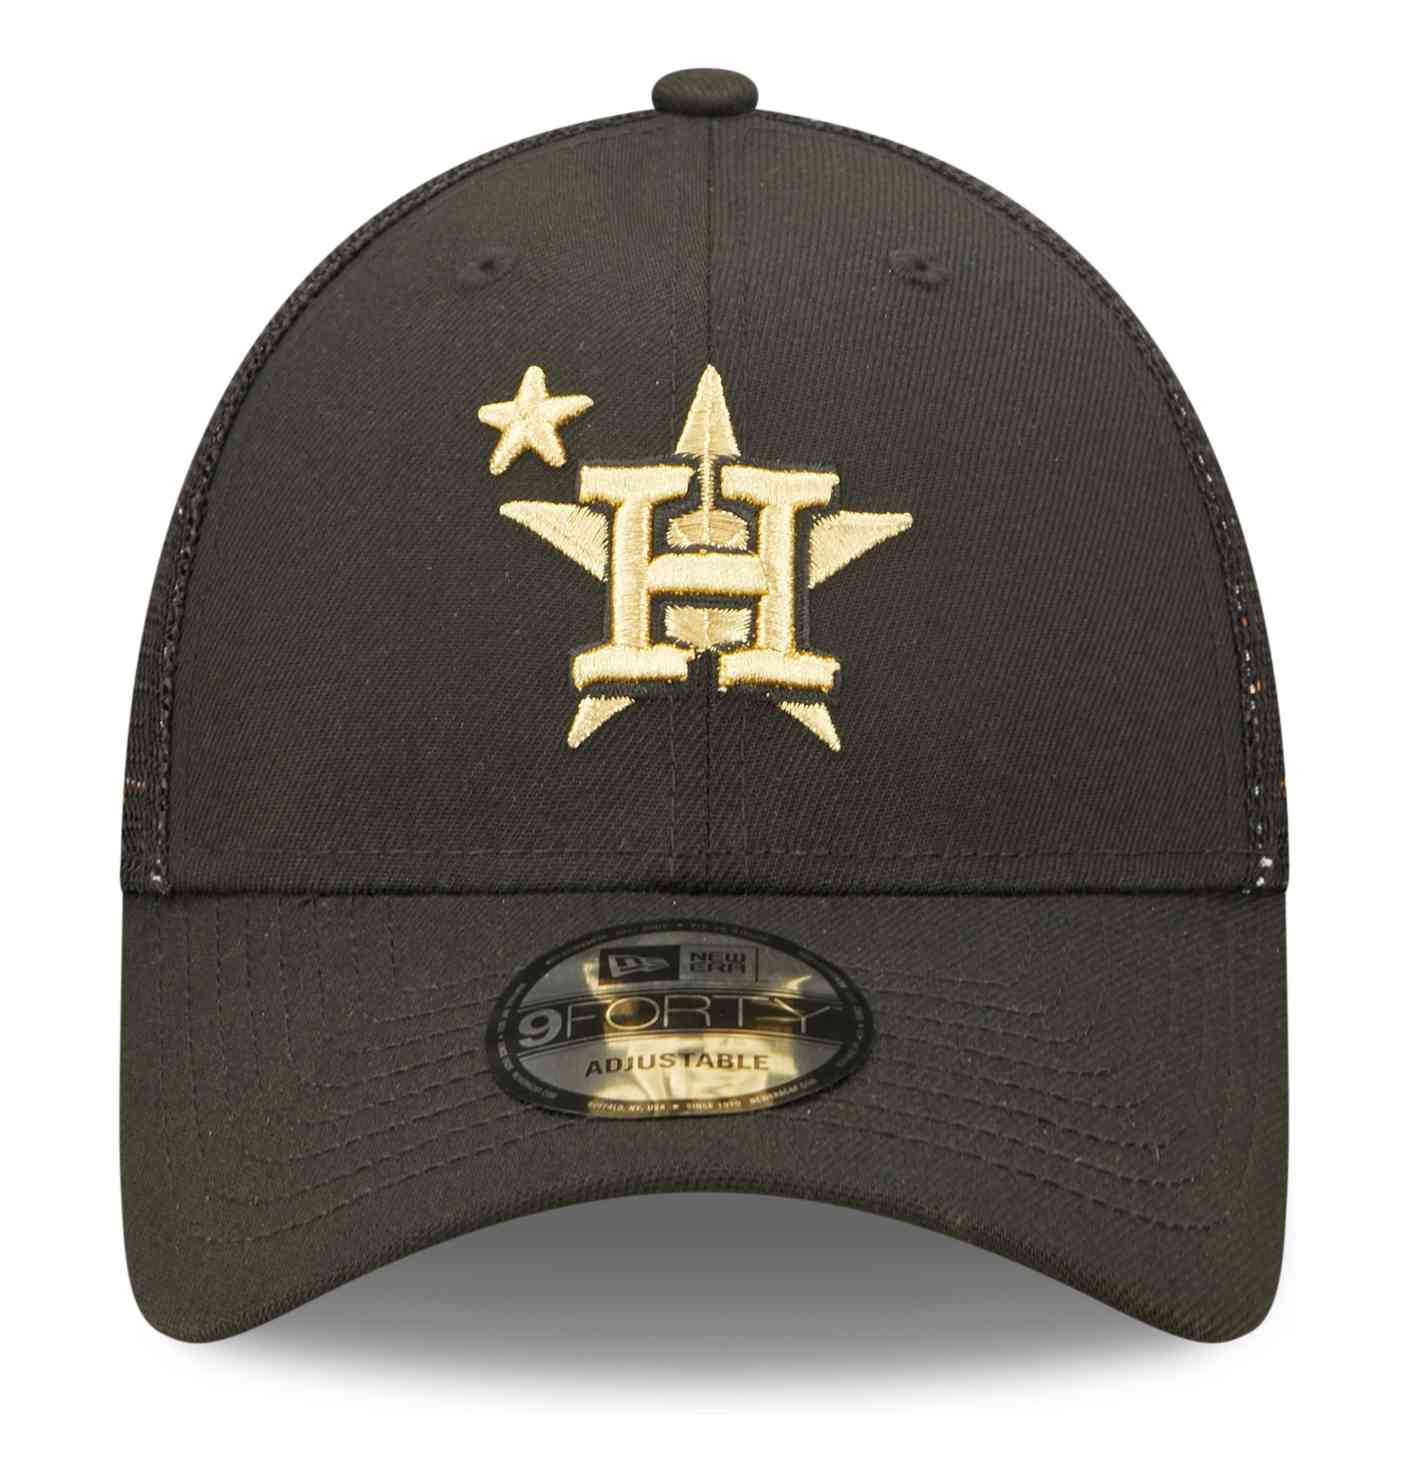 New Era - MLB Houston Astros All Star Game Patch 9Forty Snapback Cap